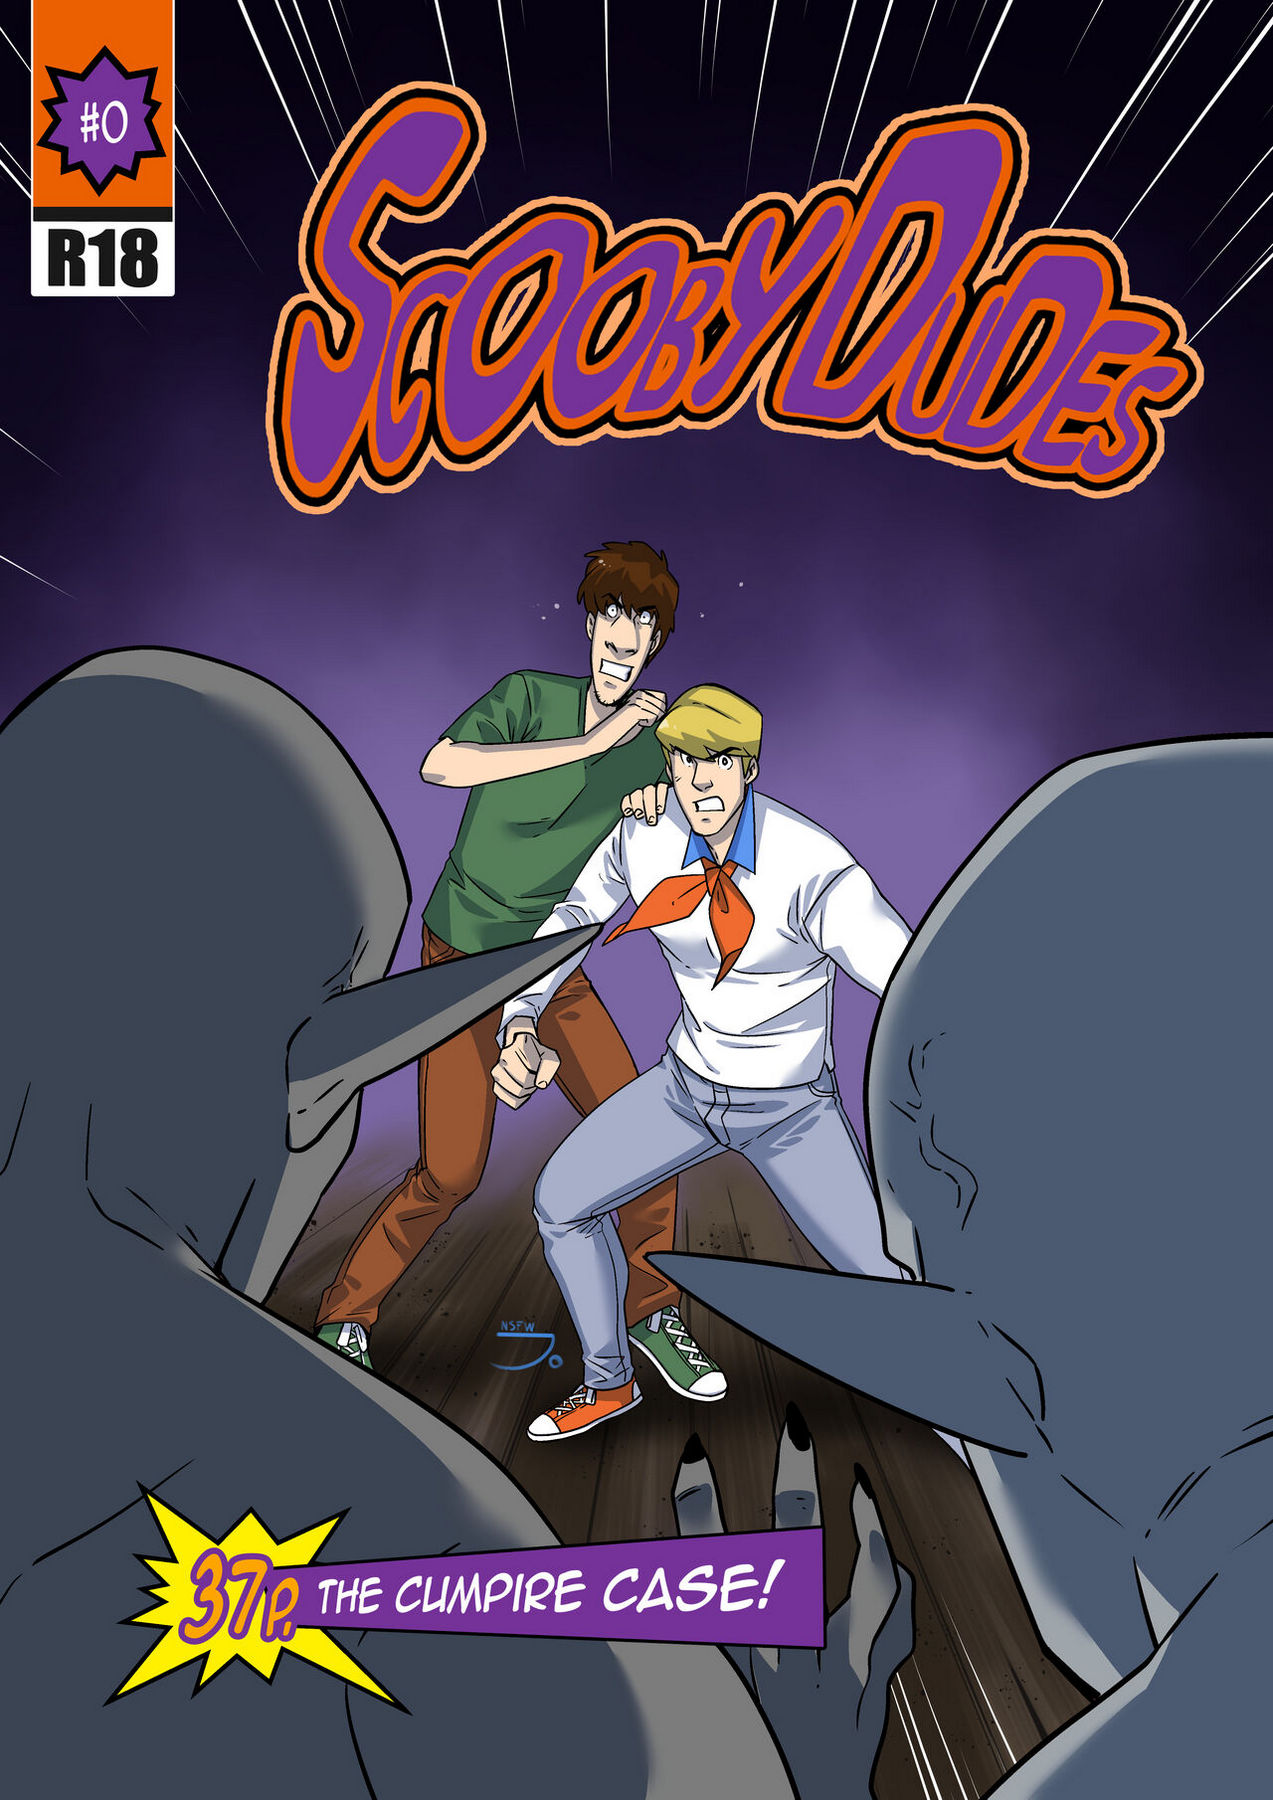 Cover Scooby Dudes 0 – The Cumpire Case!